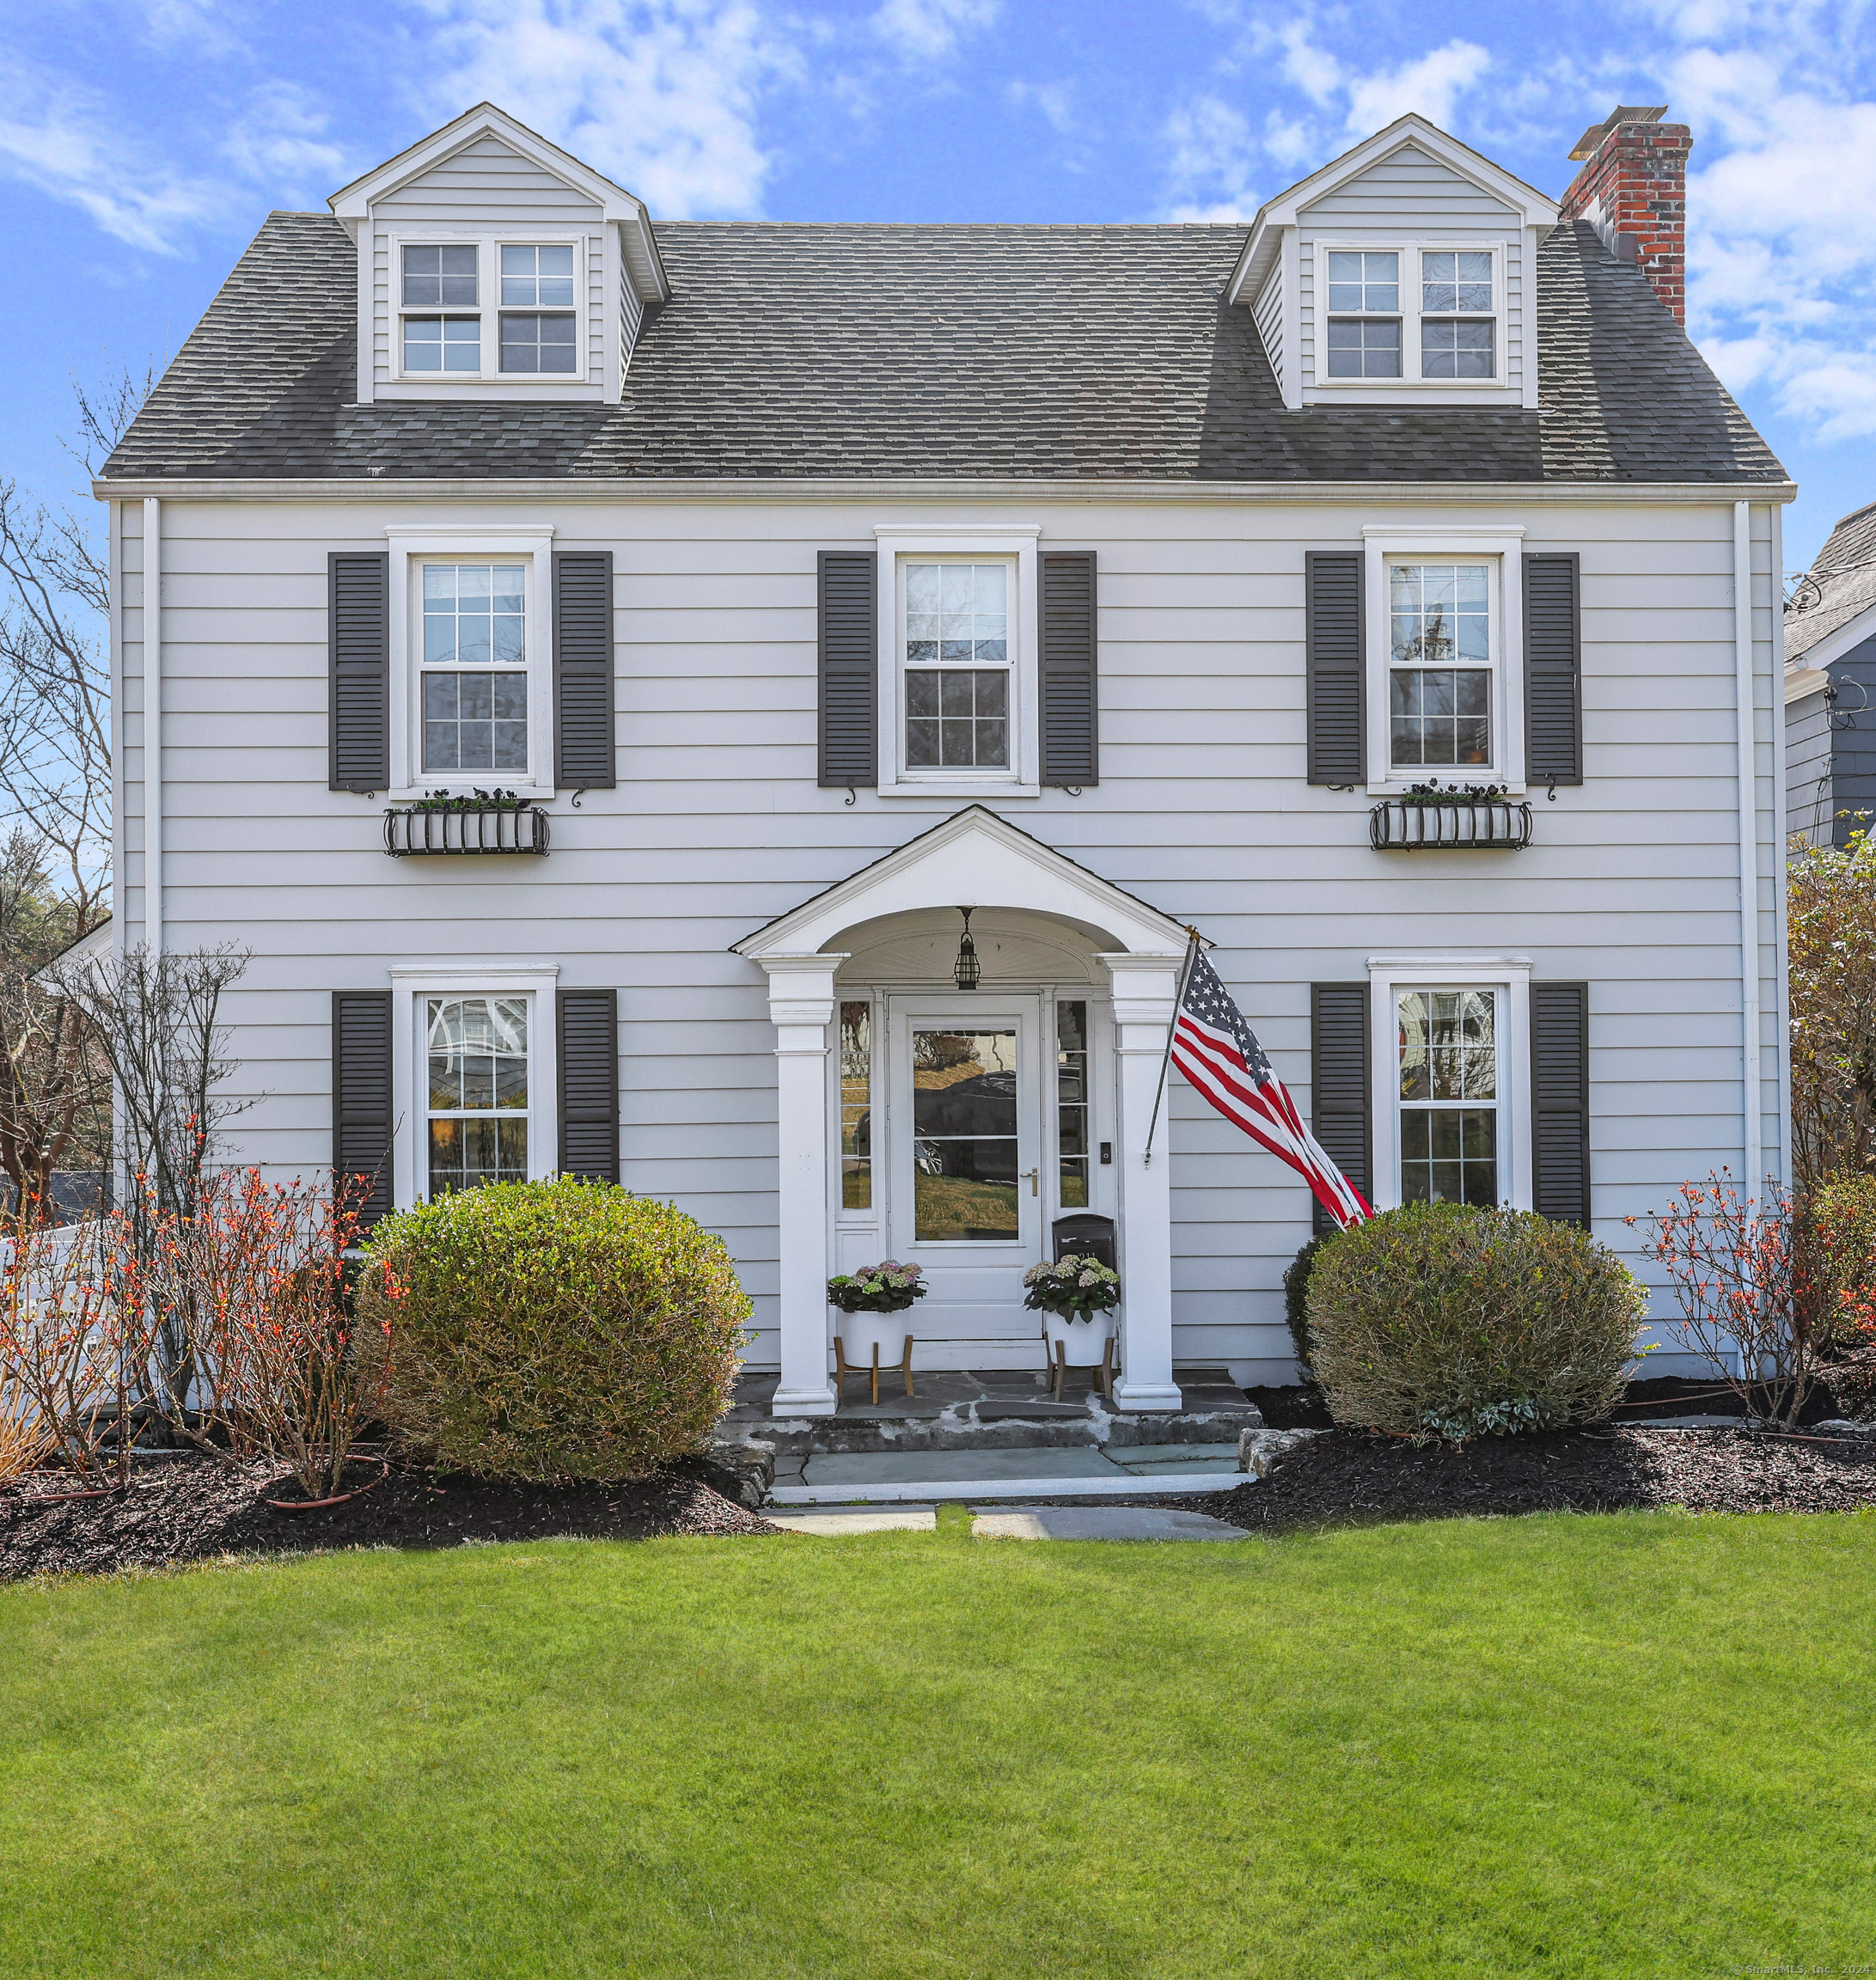 ***HIGHEST AND BEST OFFERS DUE BY 12 PM ON 4/9**** Charming 1930 Stratfield Village Colonial welcomes its lucky new homeowners! Desirable neighborhood, plenty of curb appeal, flagstone front patio, backyard deck, 2 car garage. Classic portico with front door flanked by small paneled windows. Nicely finished hardwood flooring throughout. Gracious Living Room with wood burning fireplace and built-ins opening to Dining Room (currently used as a Sitting Room). Kitchen boasts granite counters, island, new Bosch fridge and dishwasher and Kitchen opens beautifully to Dining Area with charming built-in China cabinet and access to Powder Room. Upper Level offers gracious Primary Bedroom Suite with Walk-in Closet, updated Bathroom and Laundry Area. There are 2 additional Bedrooms and Updated Hallway Bath finishing out this level. Walk-up Attic has many possibilities--Home Office, Bedroom, Playroom. Home contains many updates: New HVAC system heats and cools WHOLE house including Basement and Attic, Tankless Hot Water Heater, newly finished Basement, new Sprinkler System. Five mins to Black Rock Tpk shopping, 7 mins to Merritt Pkwy, 10 mins to I-95. Less than 7 miles to Downtown Fairfield offering well-liked Restaurants, Shops, 2 Theatres & best of all 5 beautiful Beaches, Marina, Parks. Fairfield's Public Schools are highly rated!